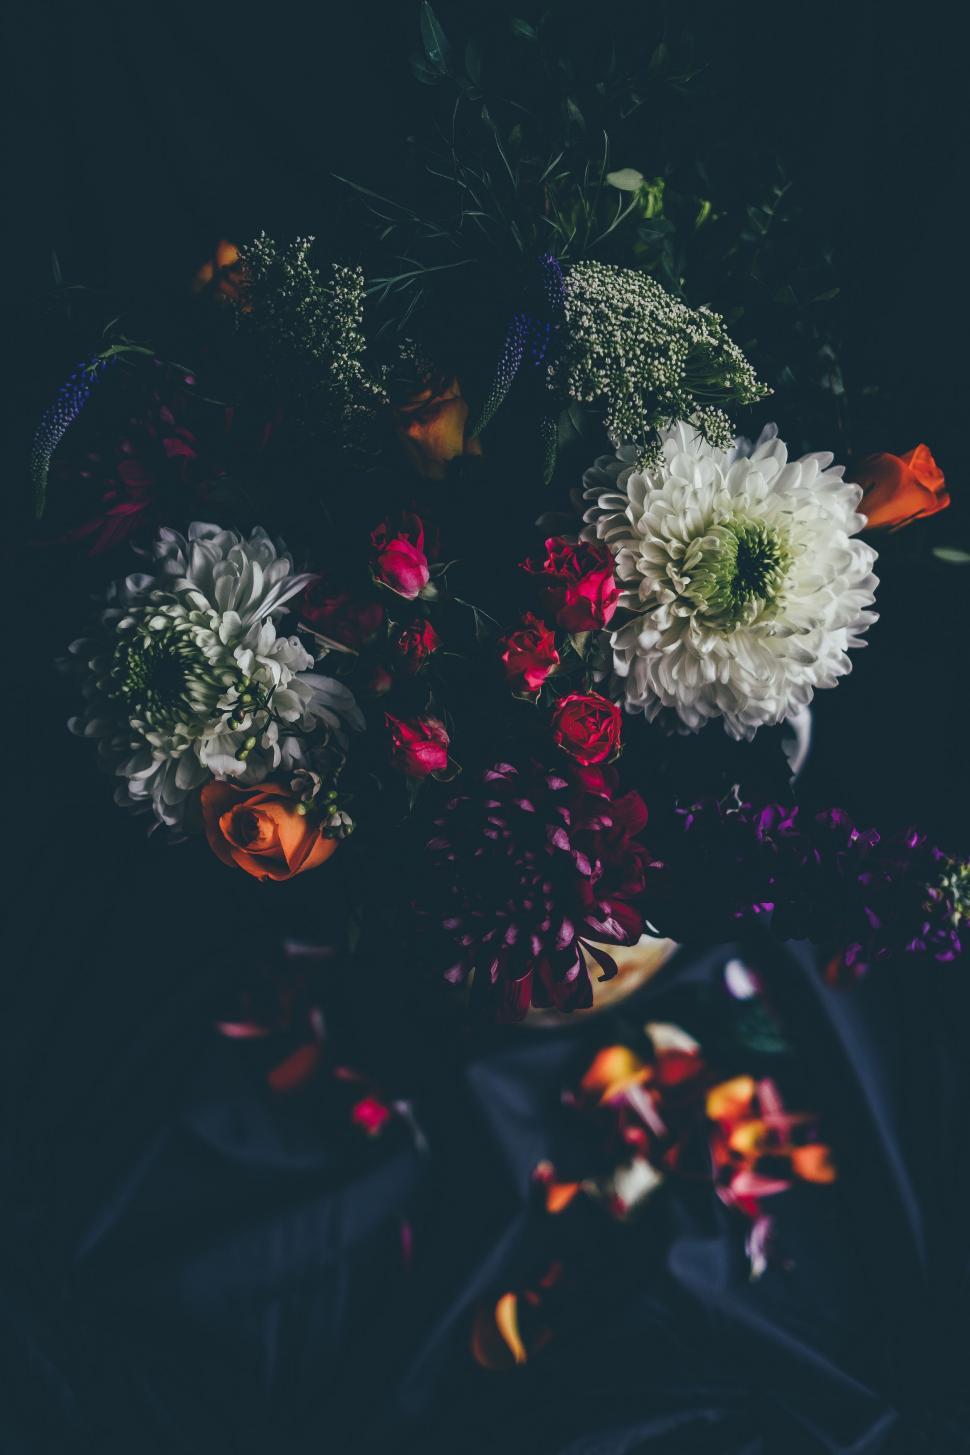 Free Image of A Bouquet of Flowers on a Table 